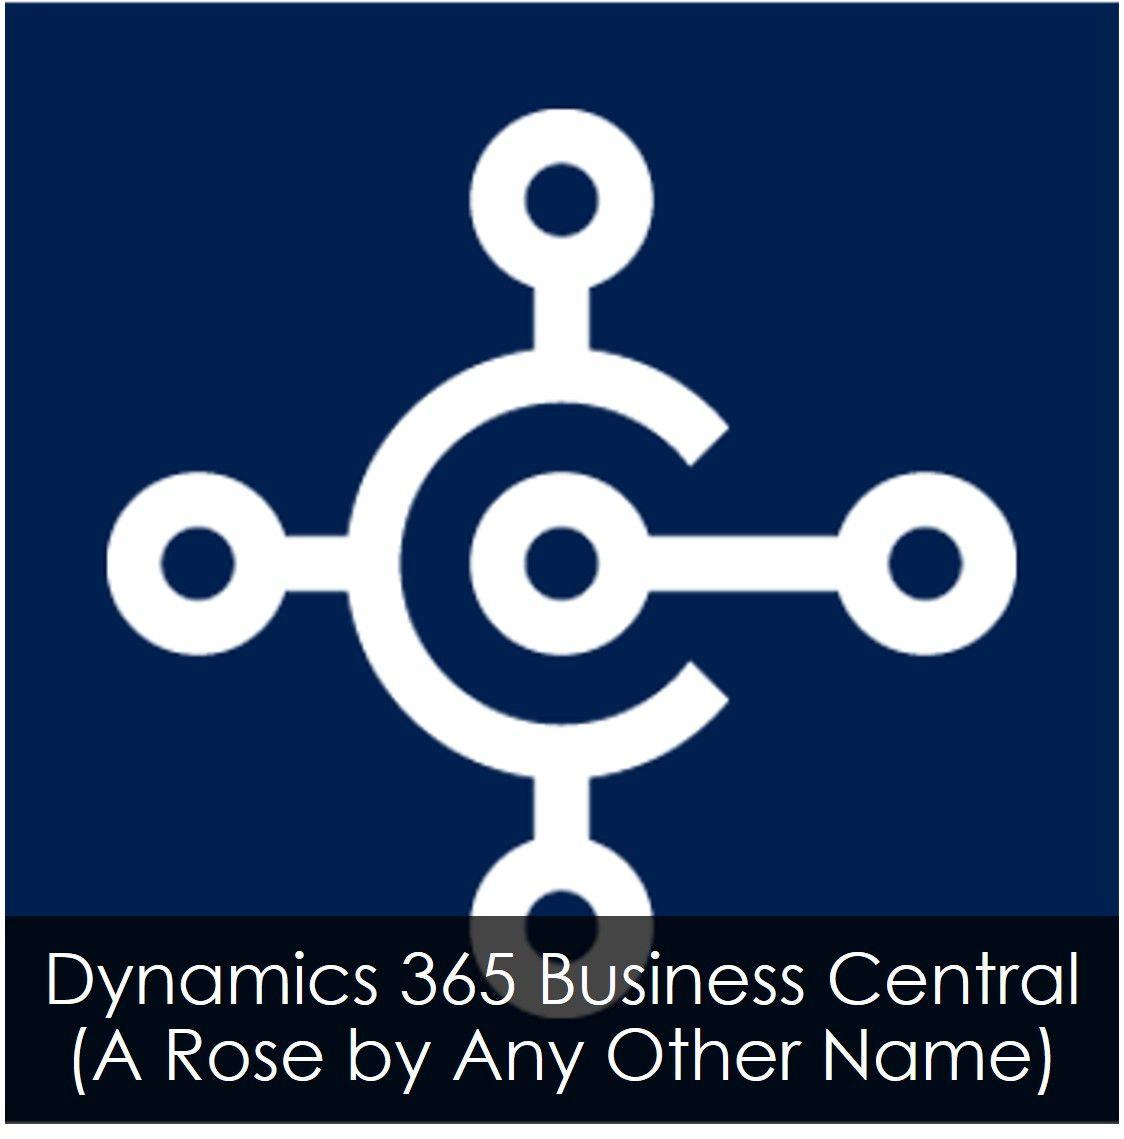 D365 Logo - Microsoft Dynamics 365 Business Central A Rose by Any Other Name